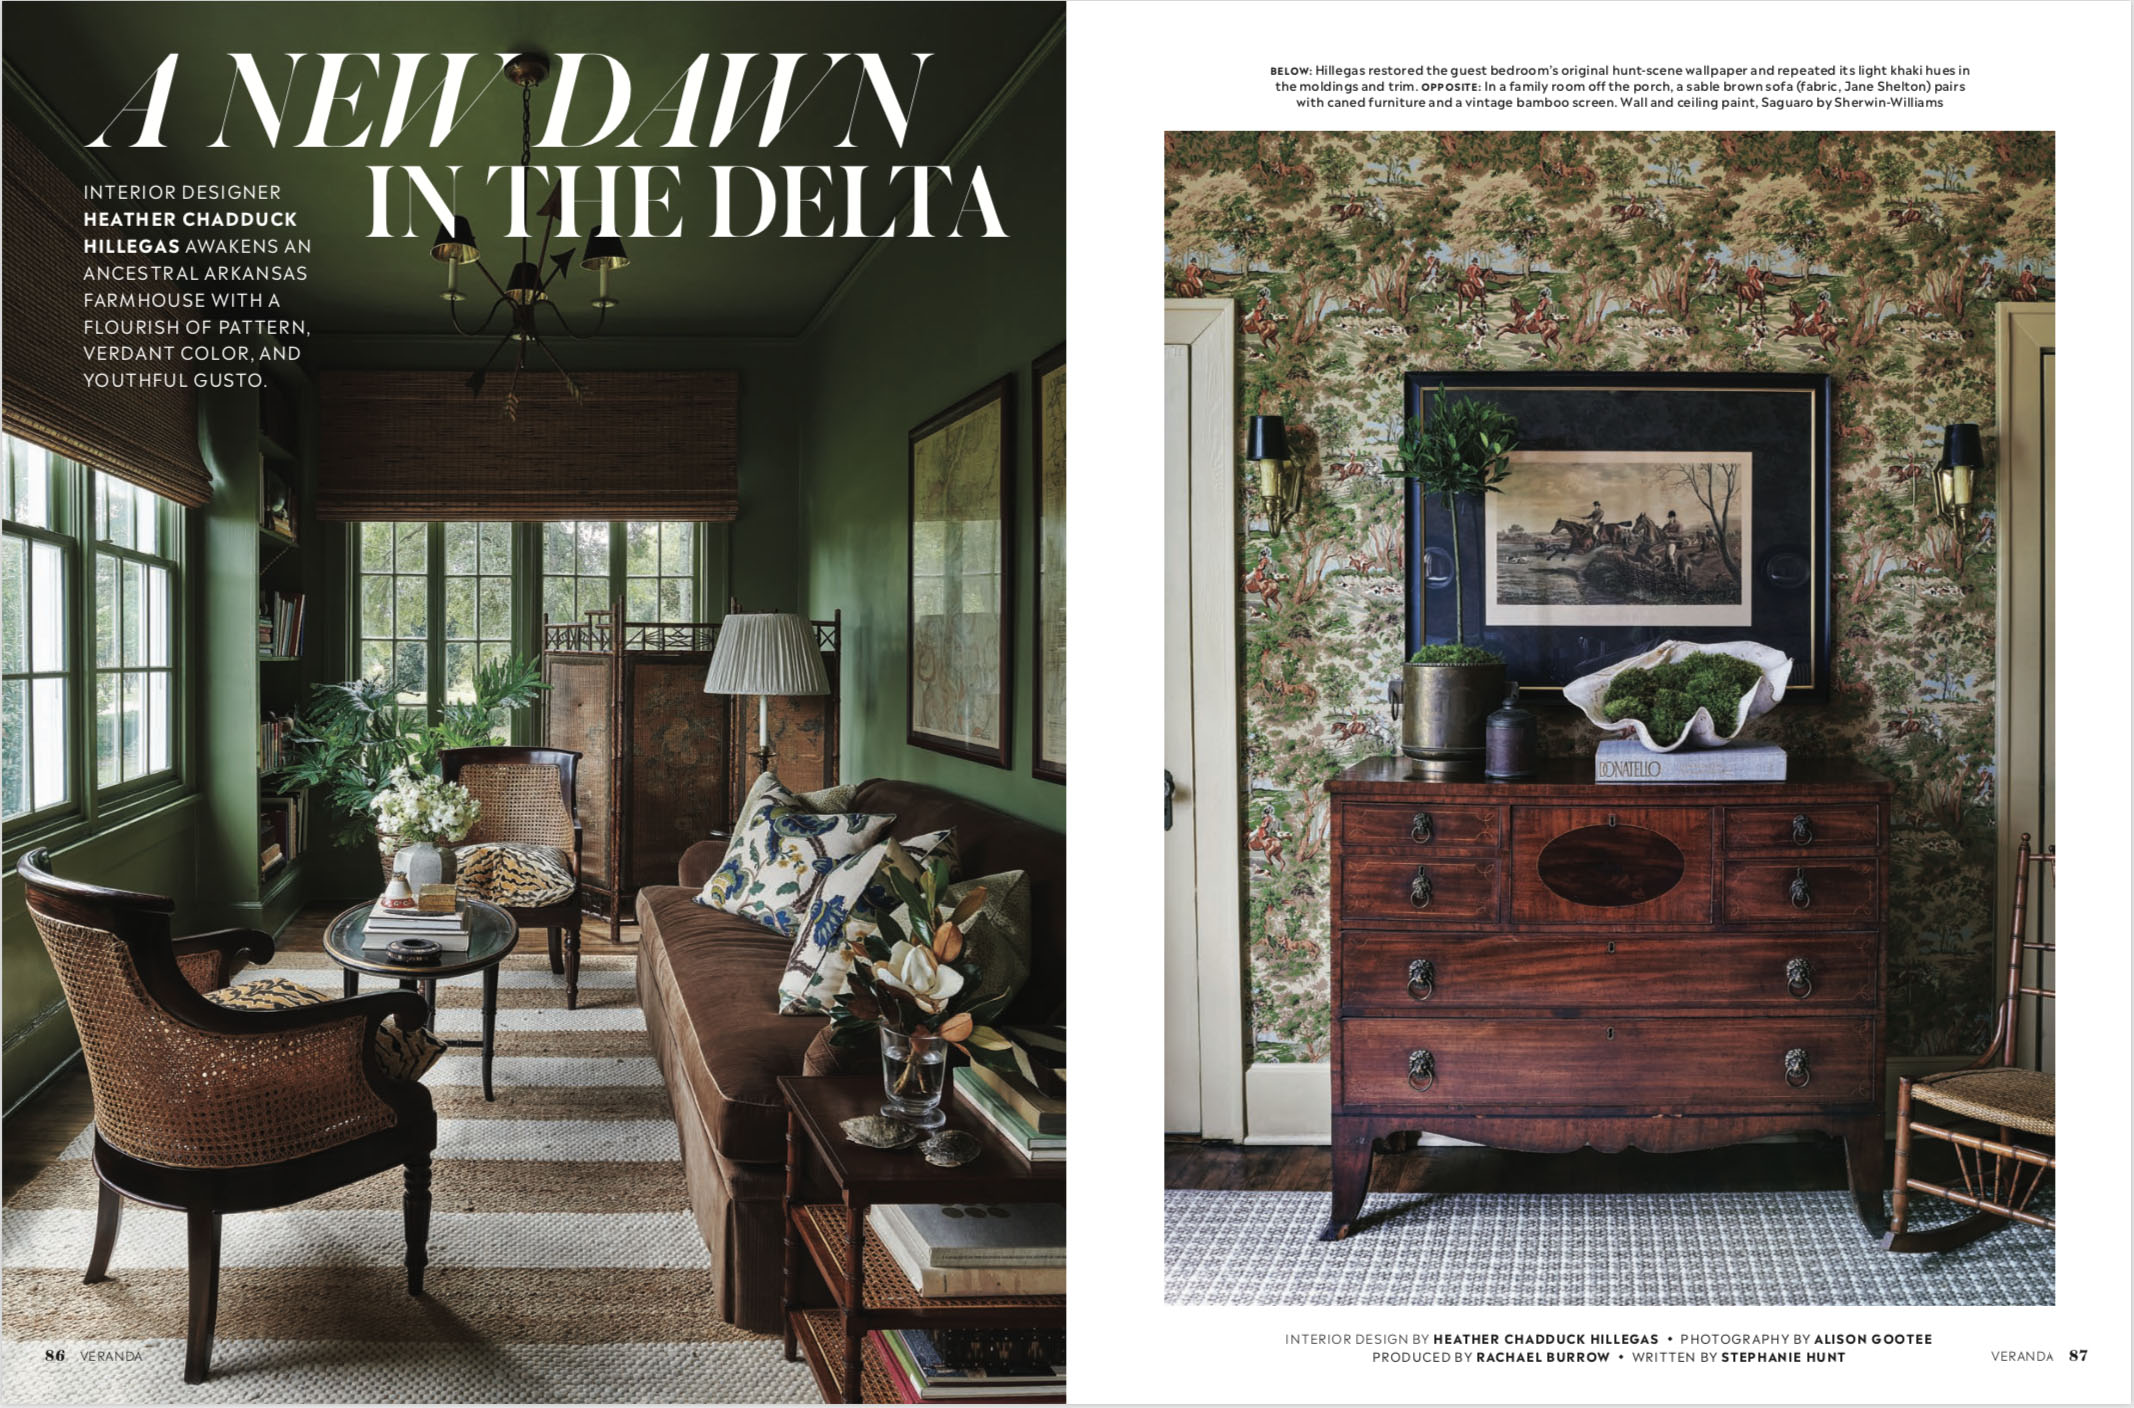 Spread of Arkansas Home by Heather Chadduck in Veranda Magazine by Alison Gootee photography